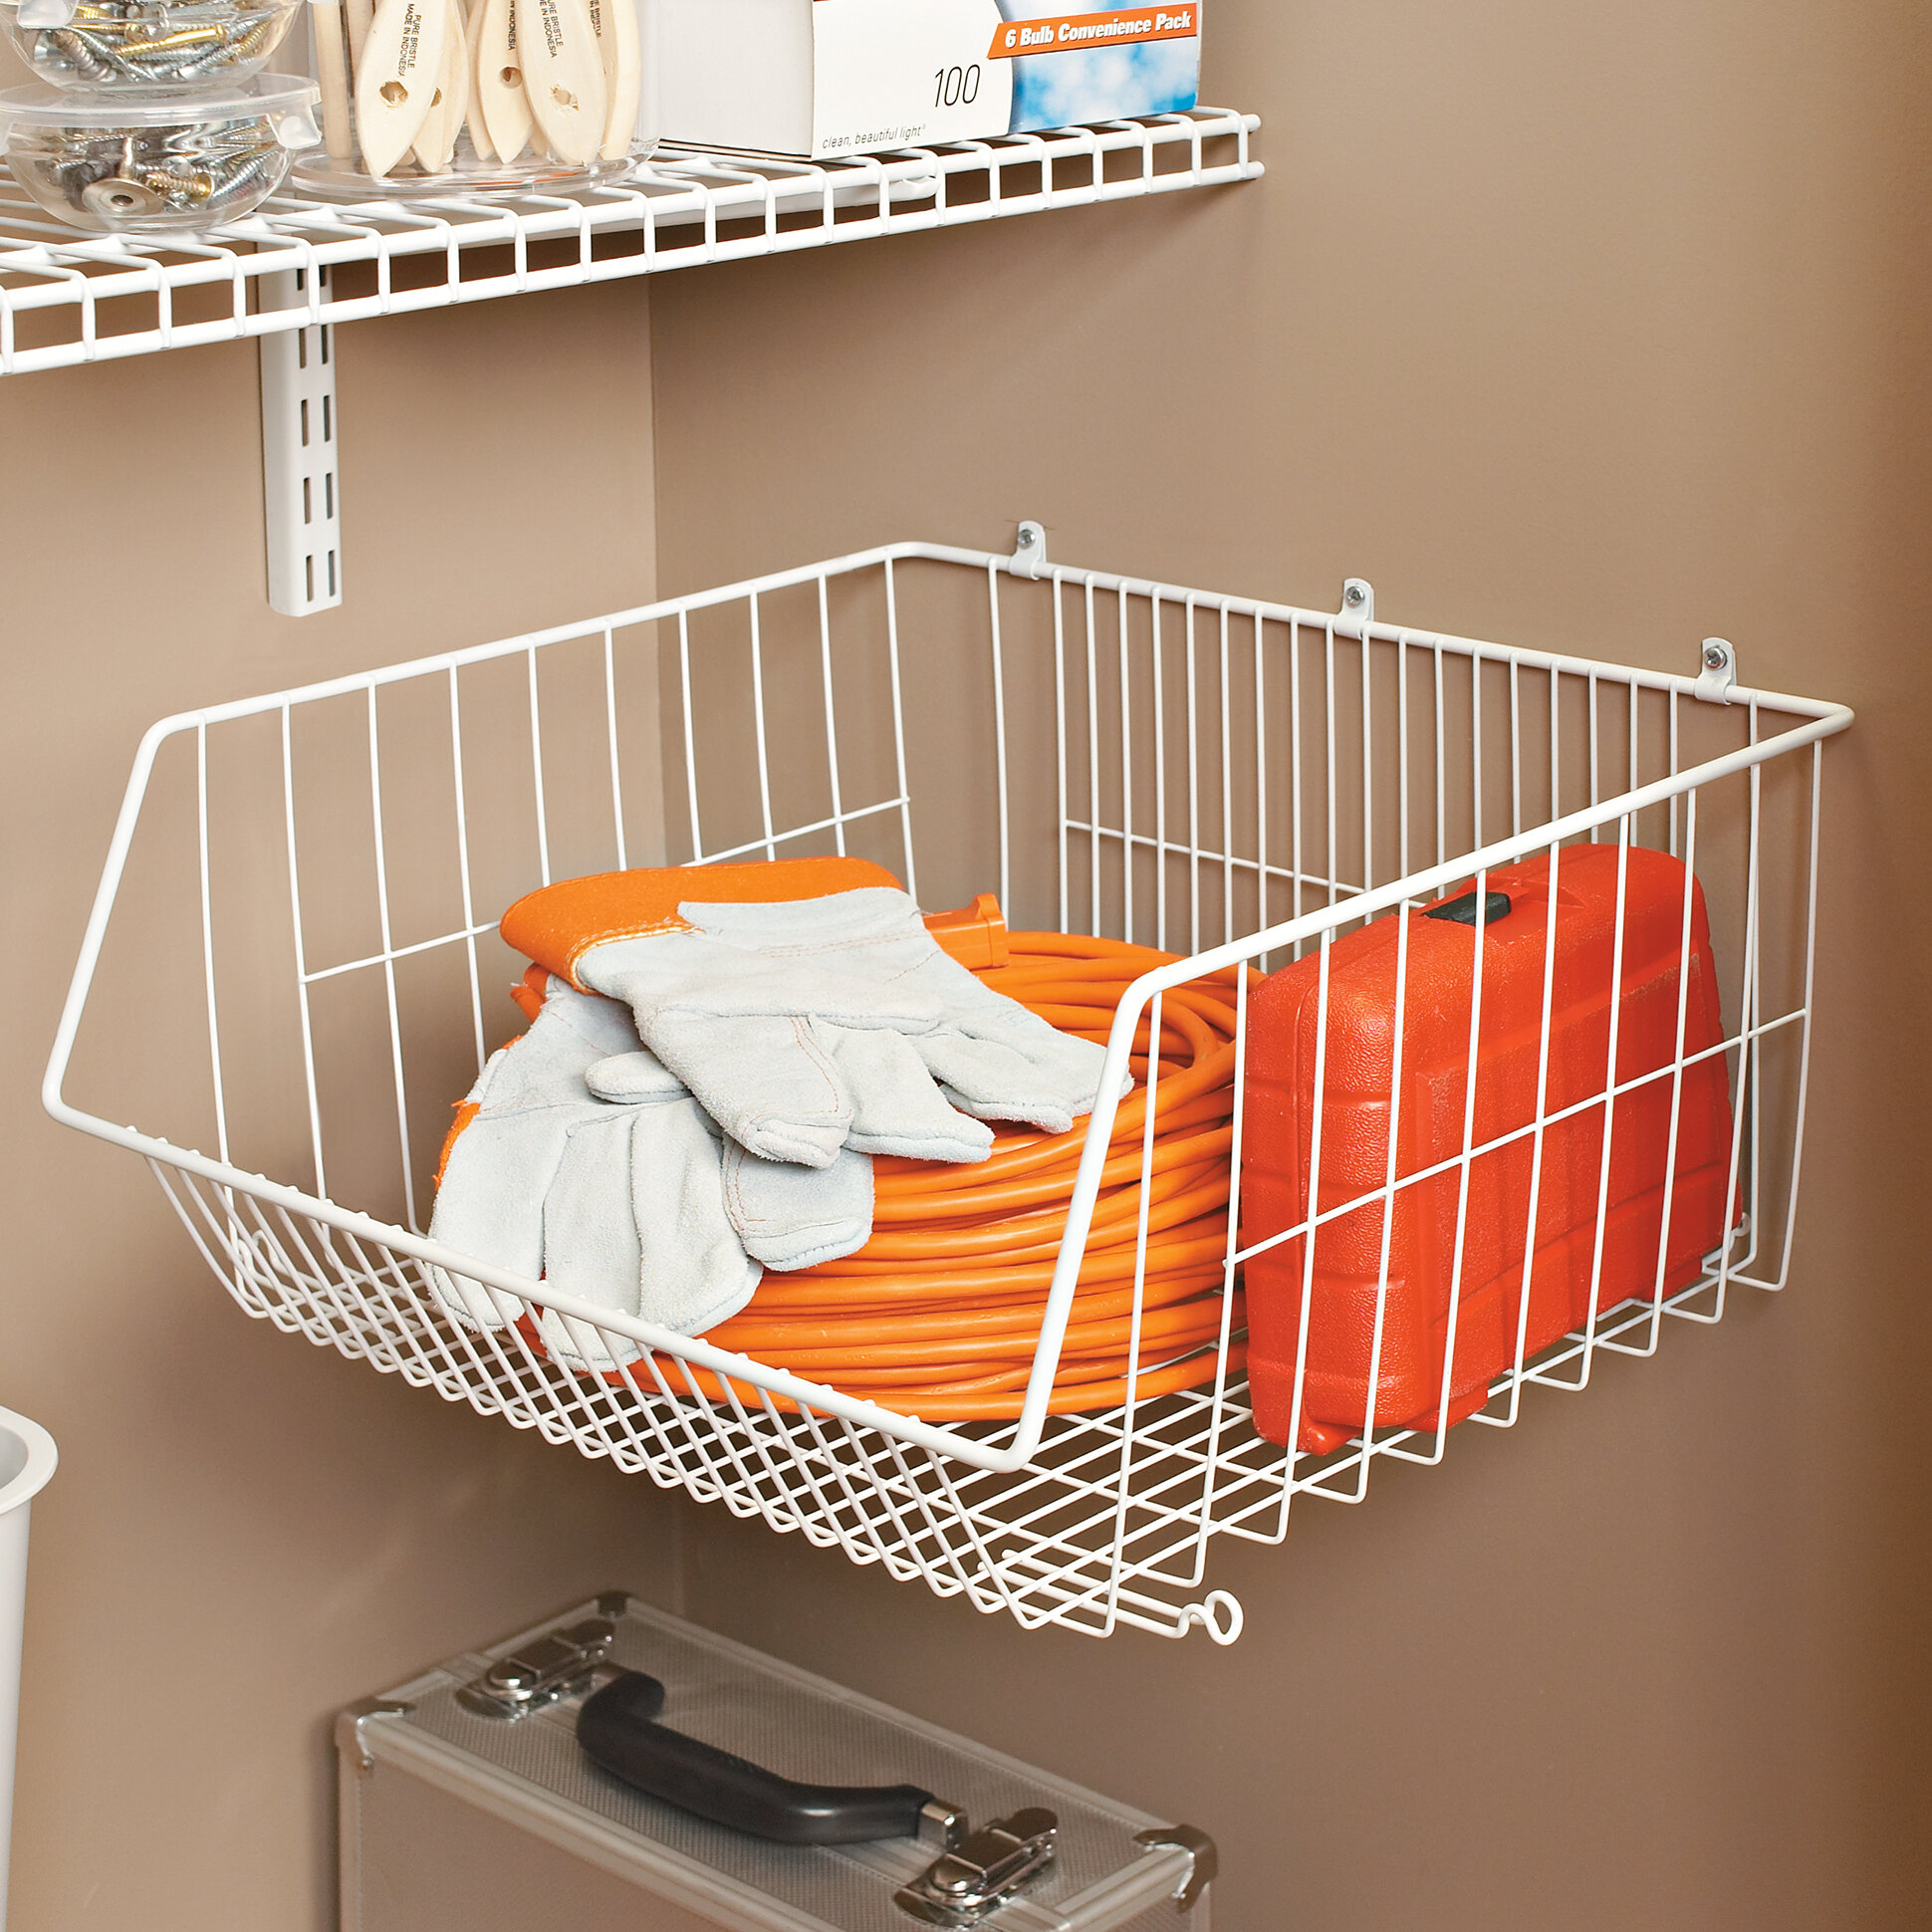 Details about   ClosetMaid Drawer Kit w 5 Wire Basket Epoxy Coated Steel 17.875 in x 41 in. 